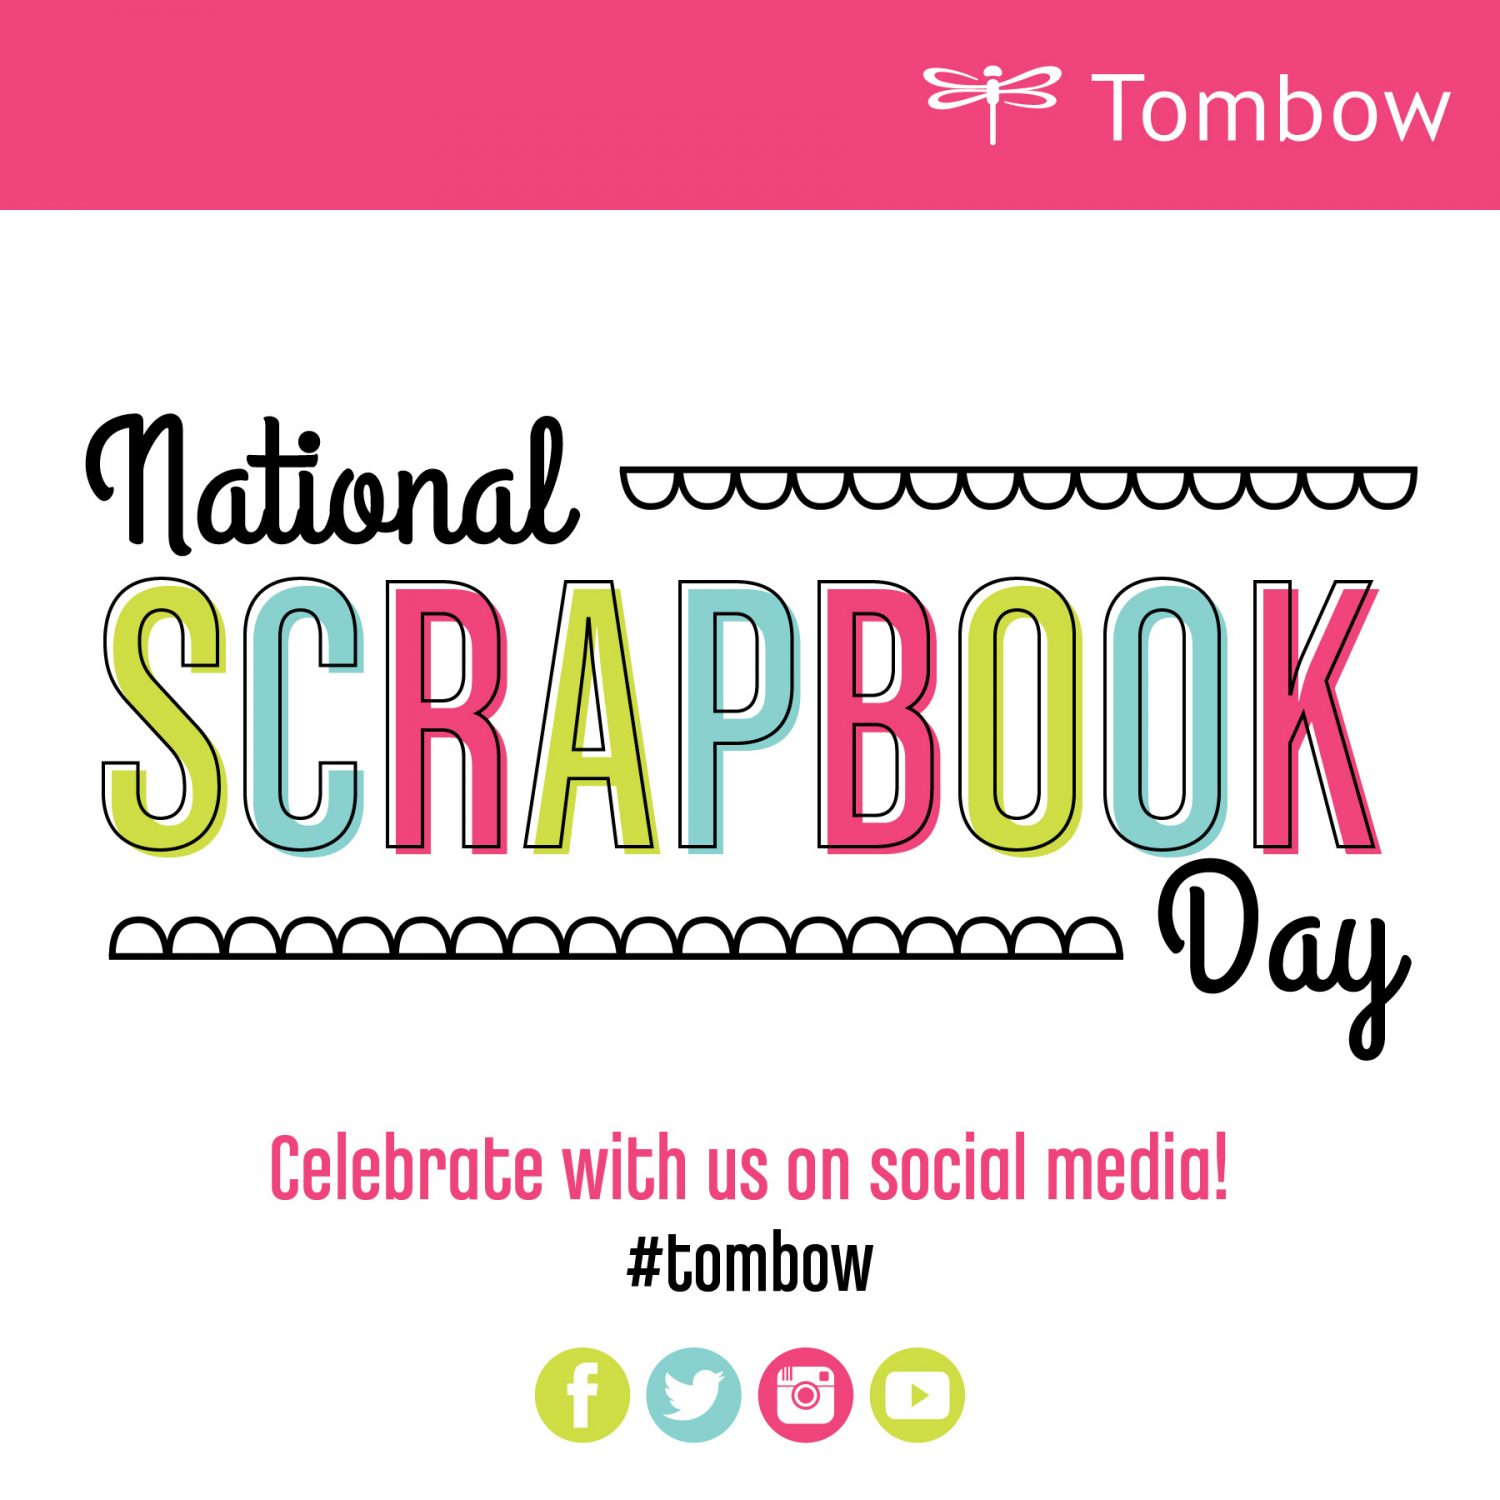 Celebrate National Scrapbook Day with @tombowusa!